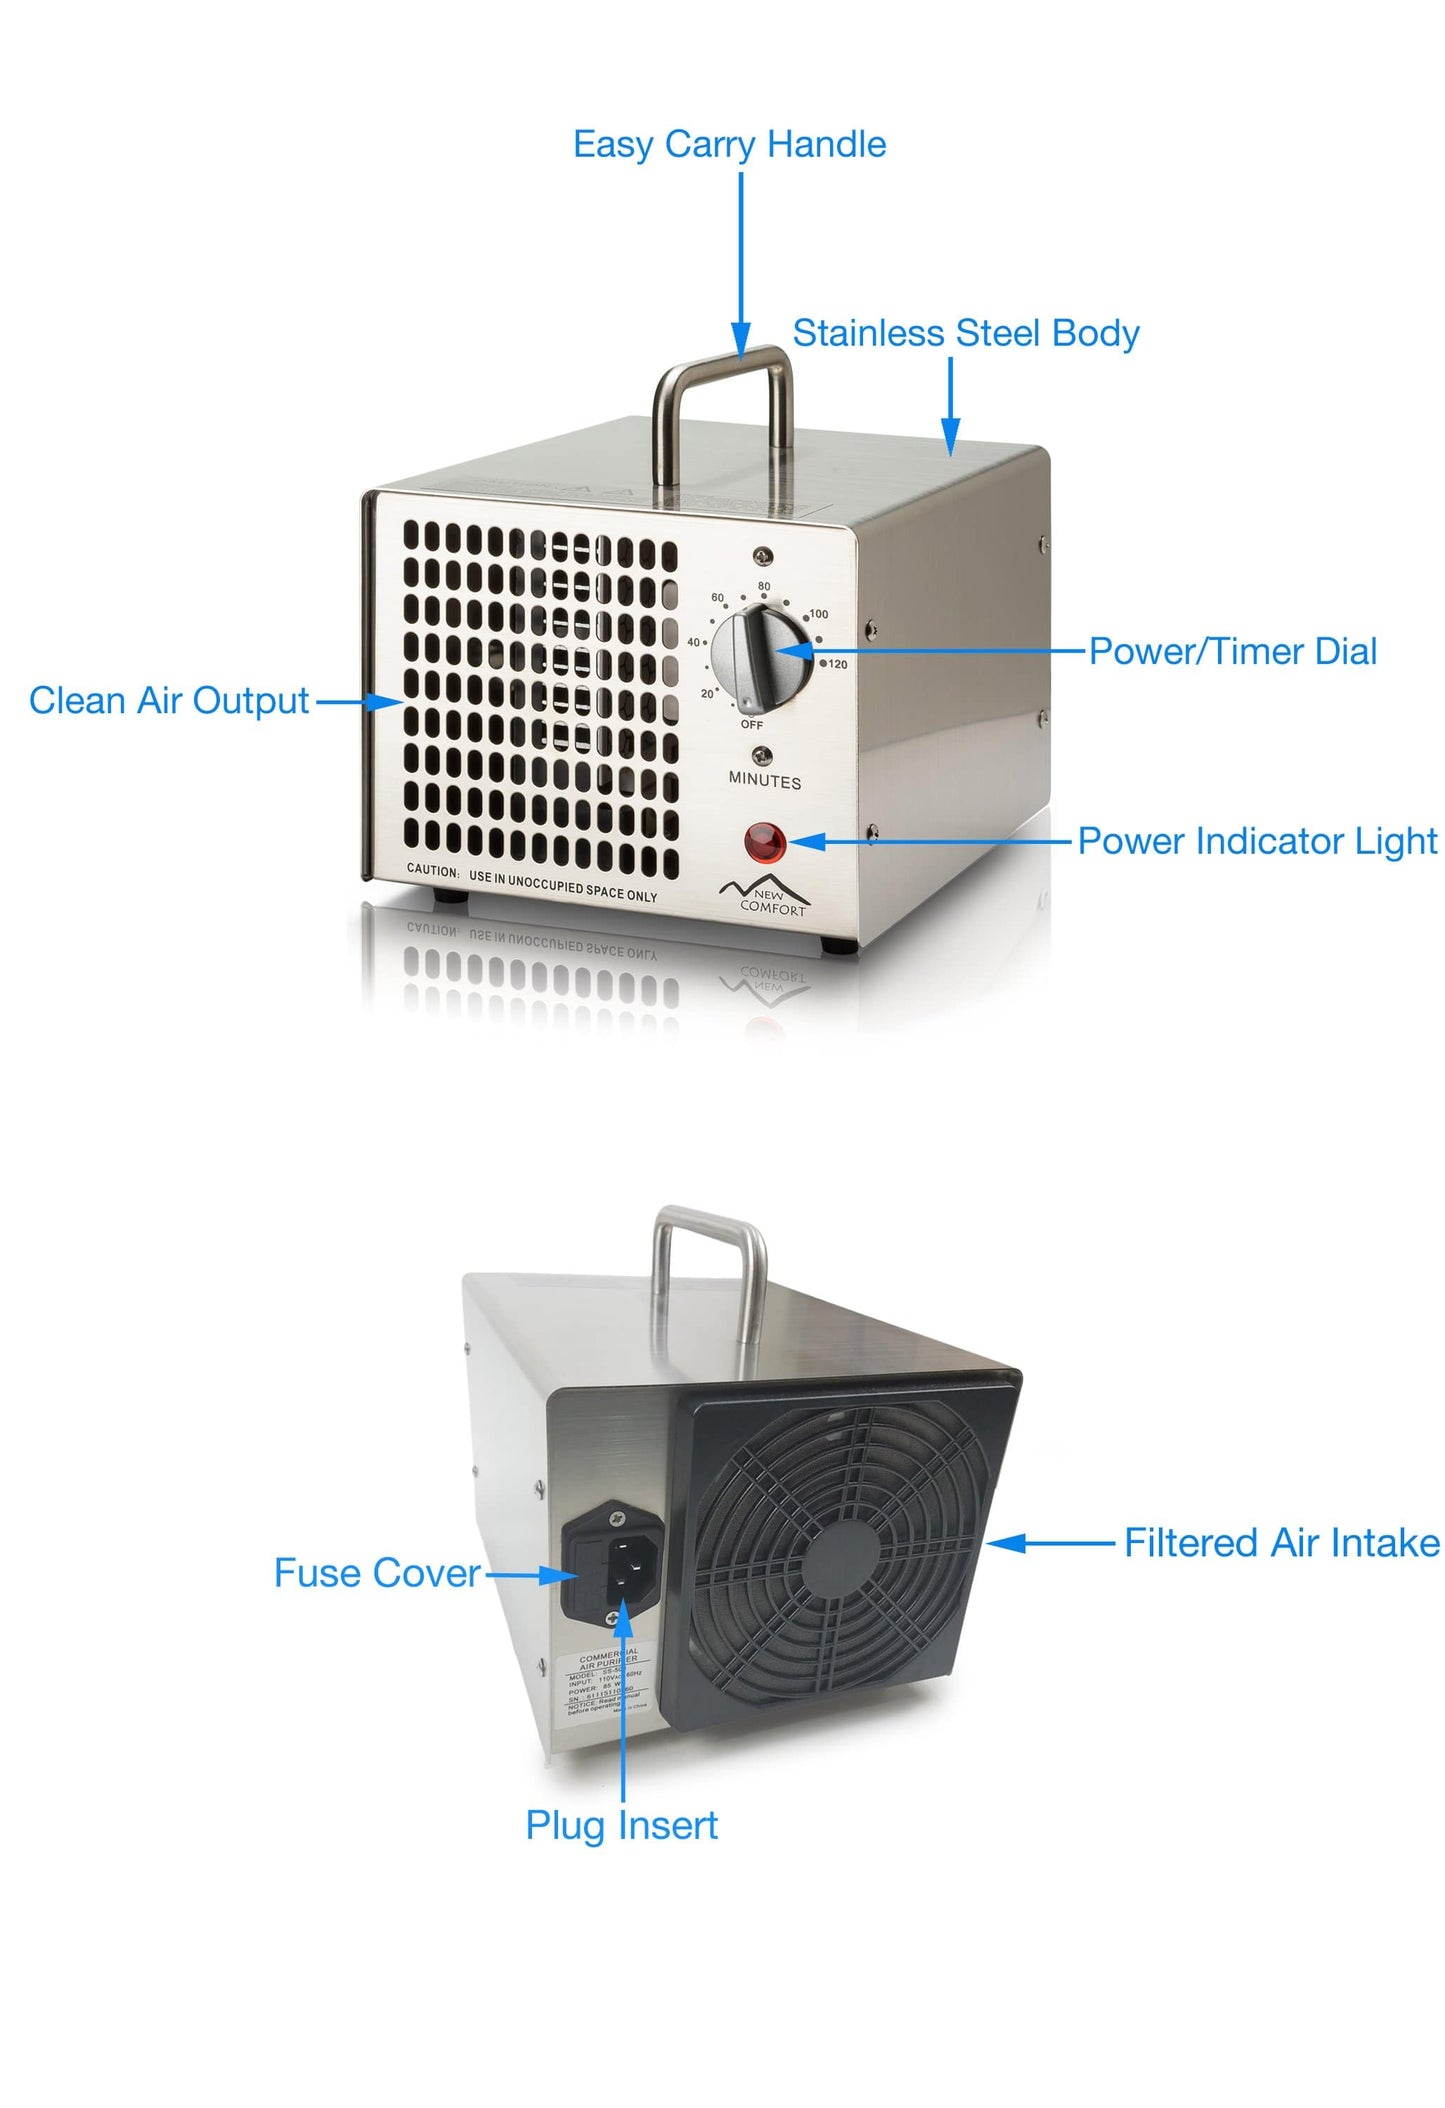 New Comfort Compact Stainless Steel Commercial Ozone Generator by Prolux